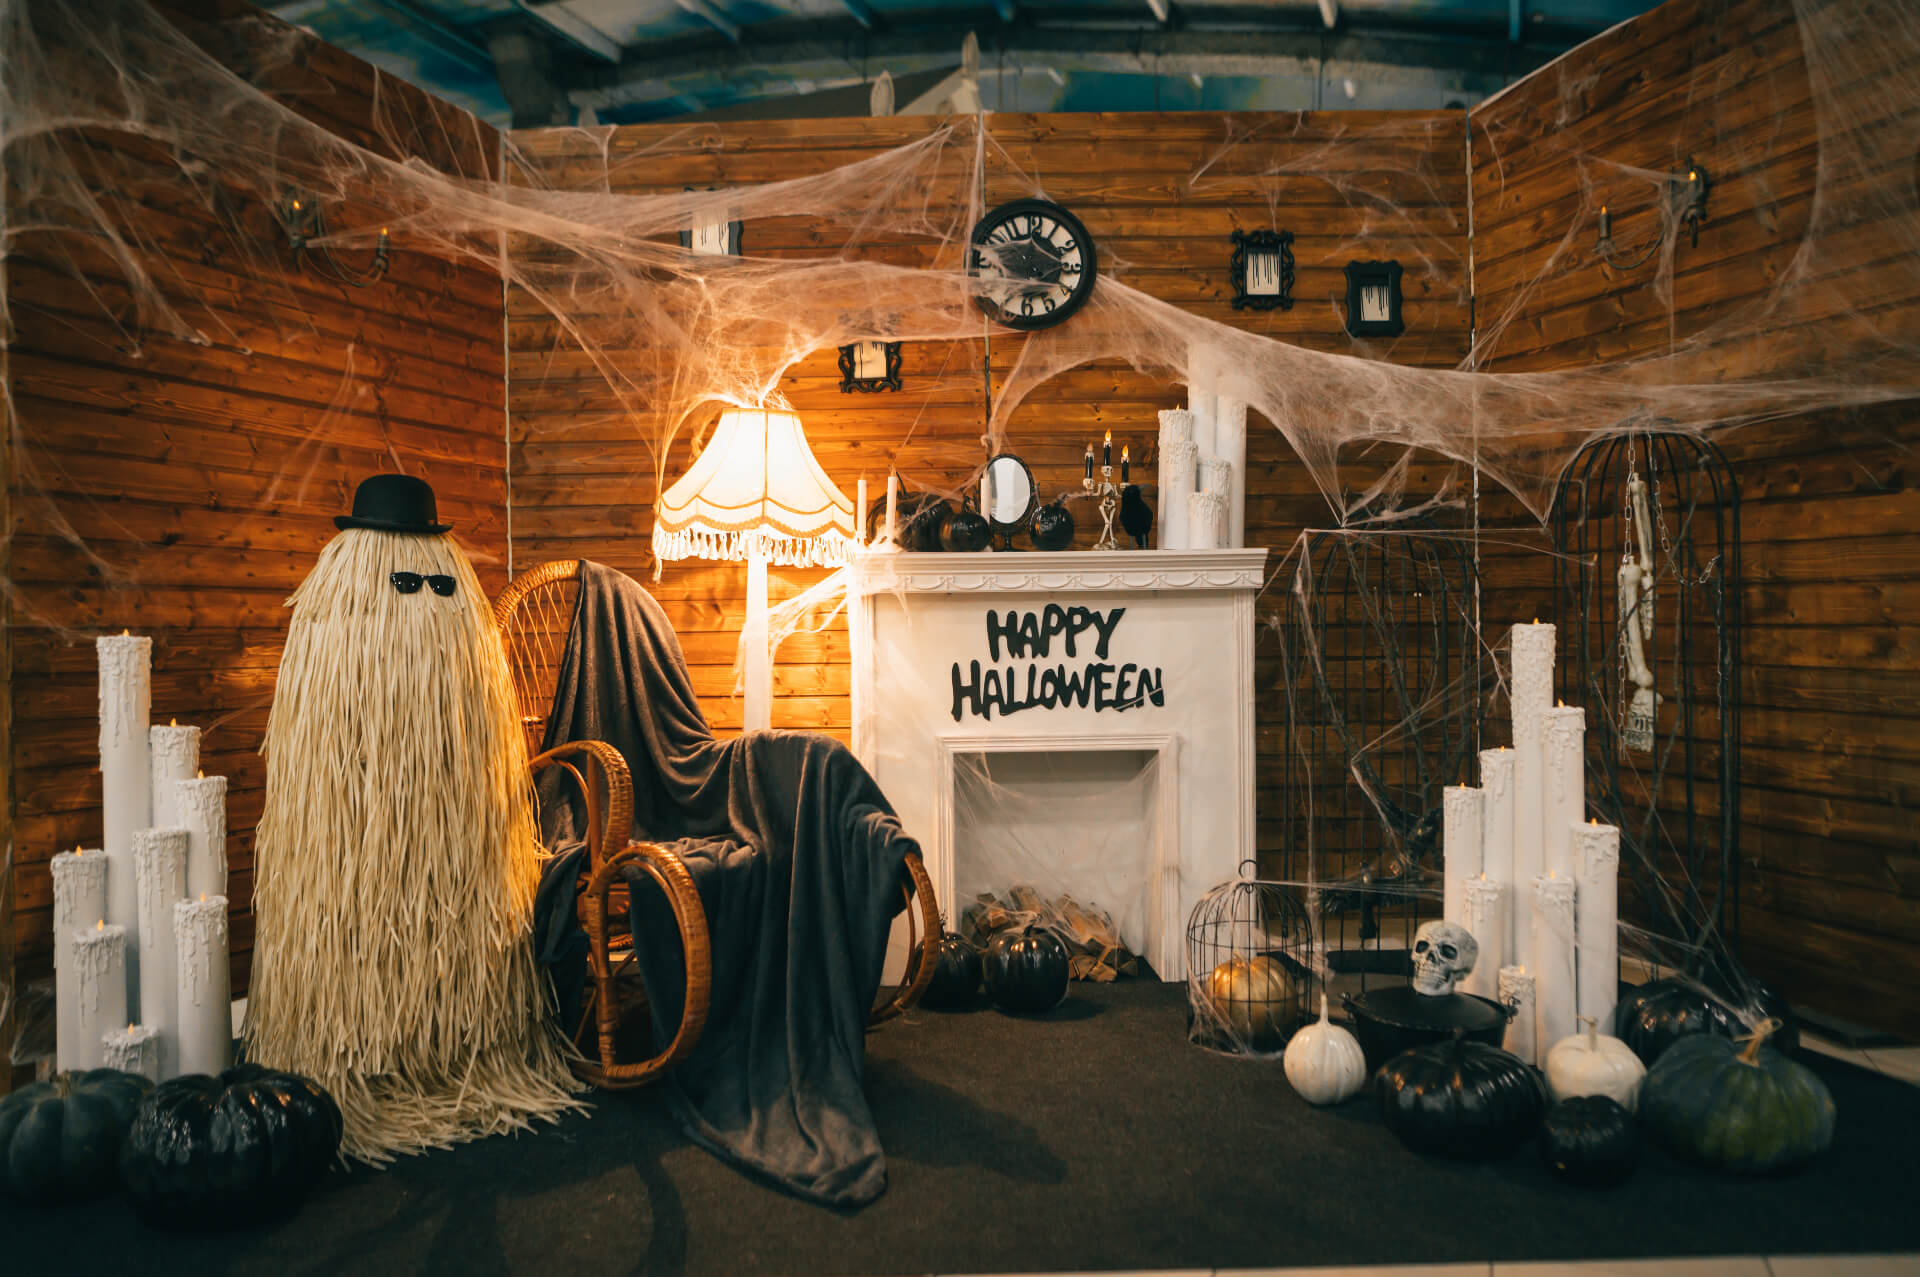 Gather the essential materials and tools needed for a DIY Halloween escape game, including locks, decorations, and more.